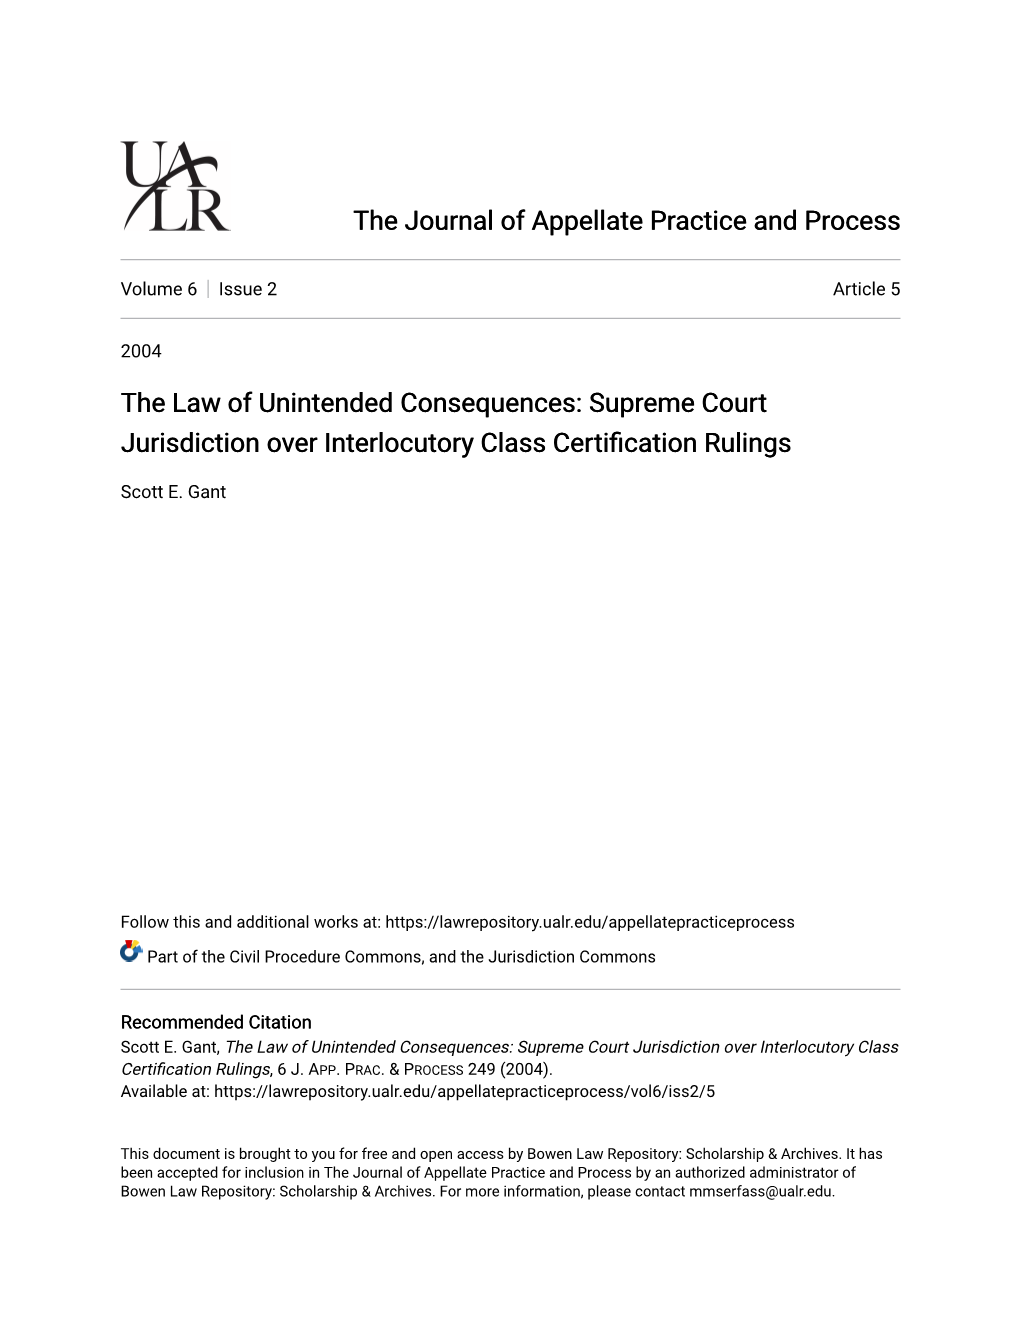 The Law of Unintended Consequences: Supreme Court Jurisdiction Over Interlocutory Class Certification Rulings